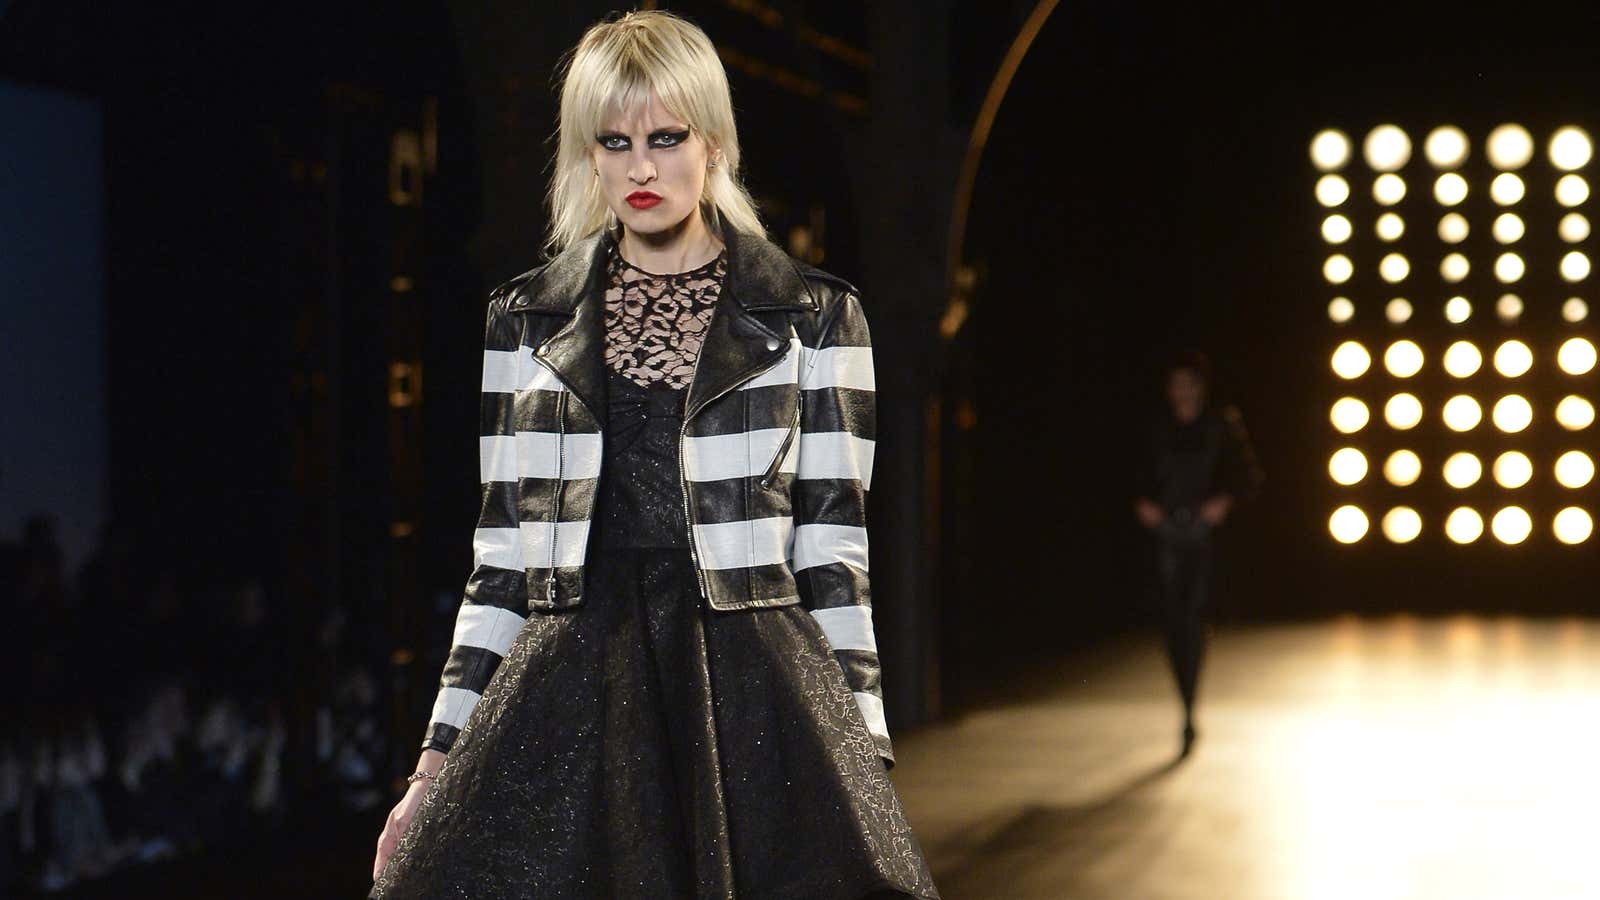 Hedi Slimane’s personal vision for Saint Laurent, idiosyncratic as it may be, has made the brand a hit.